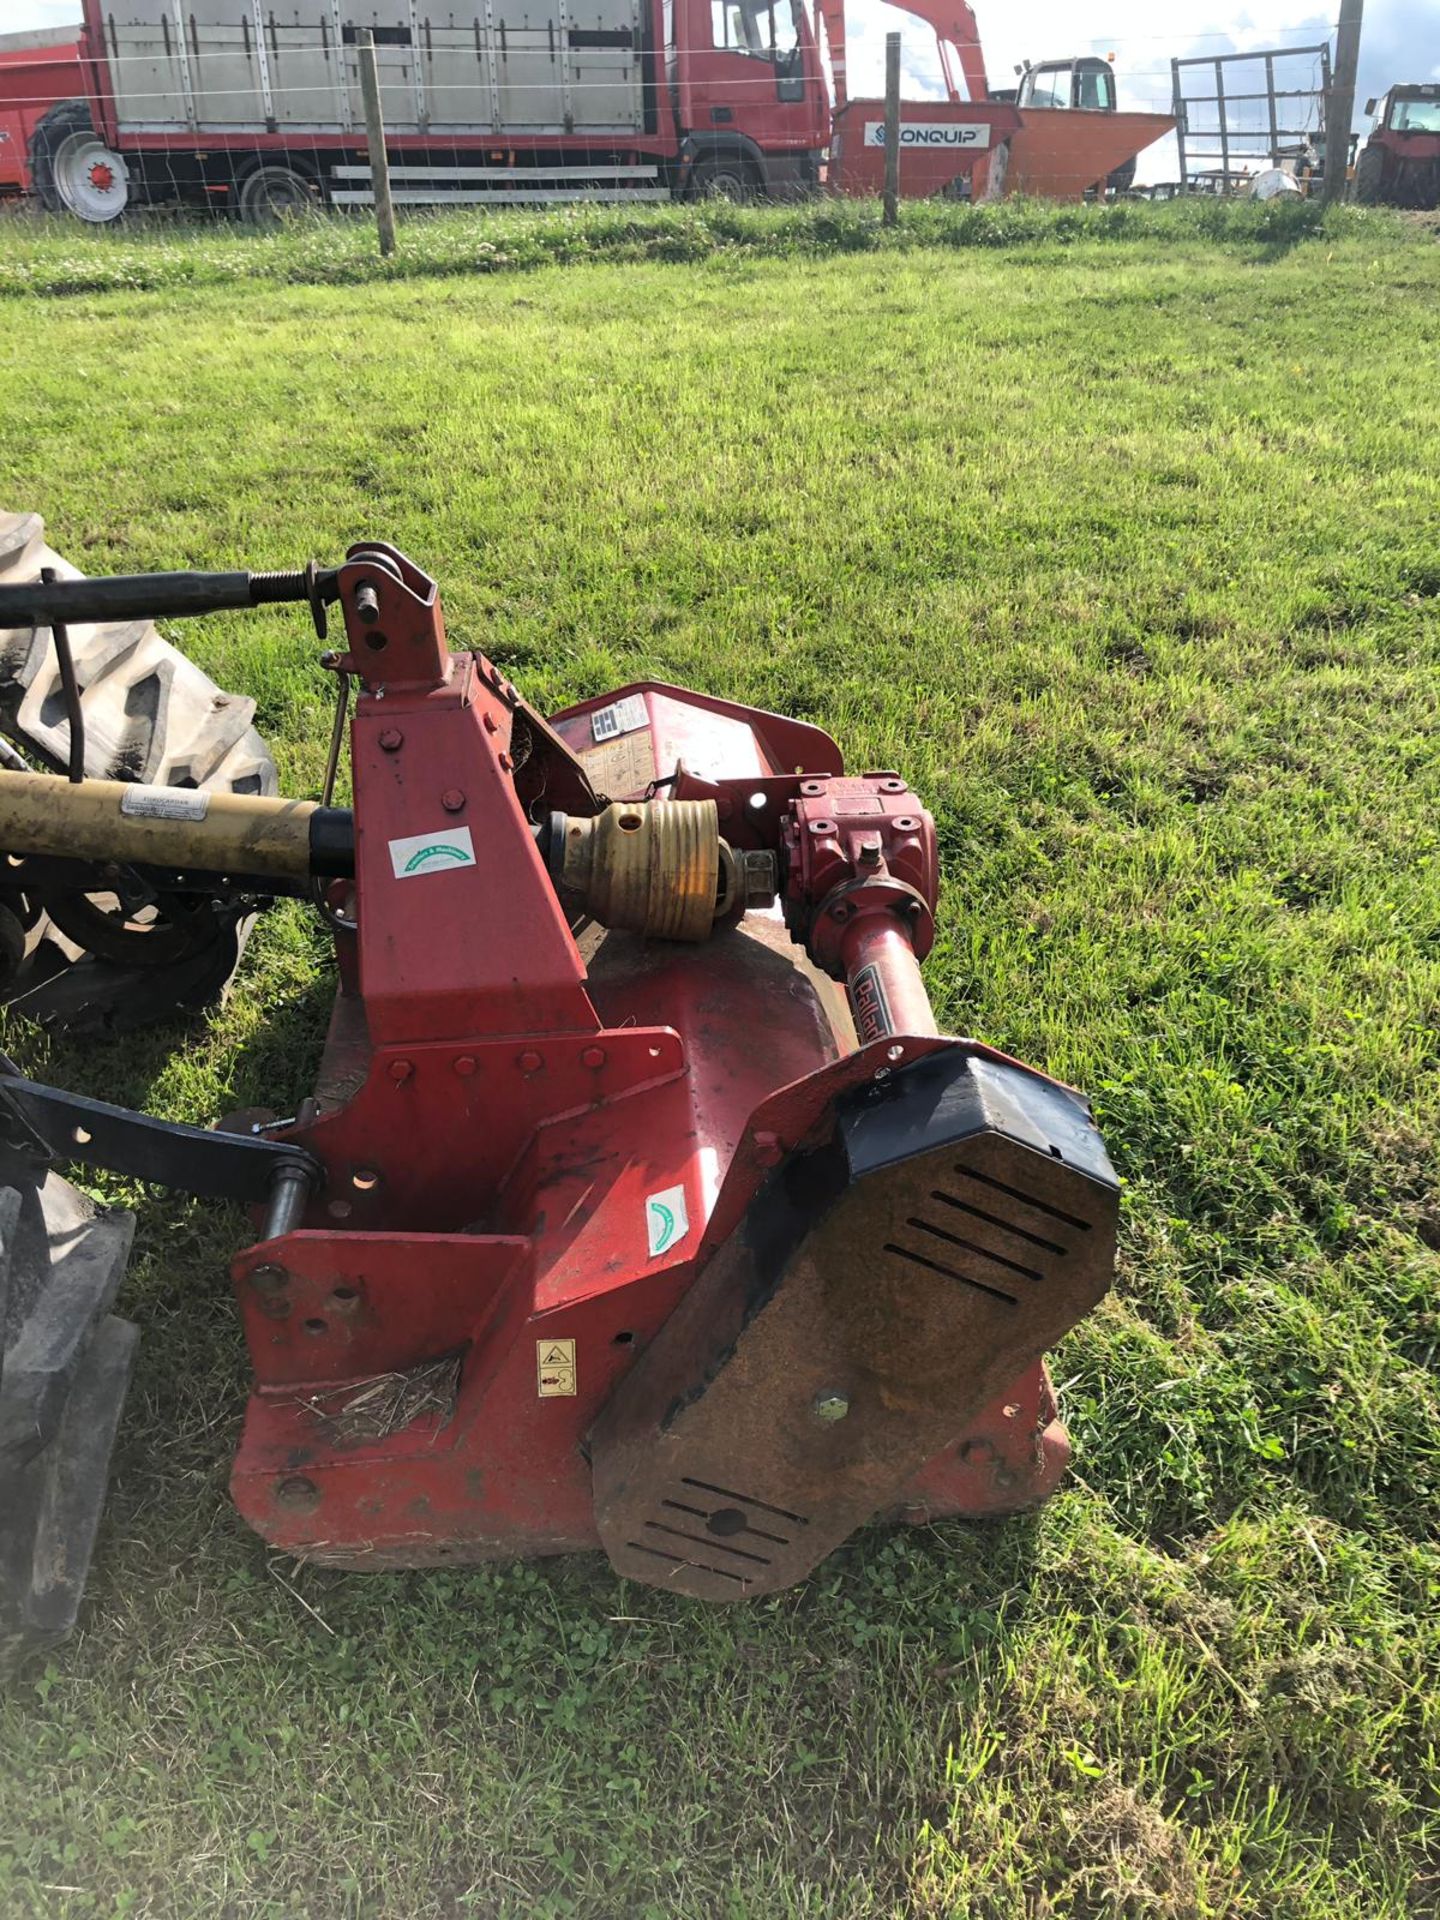 PALLADINO COMPACT TRACTOR FLAIL MOWER *PLUS VAT* - Image 3 of 4